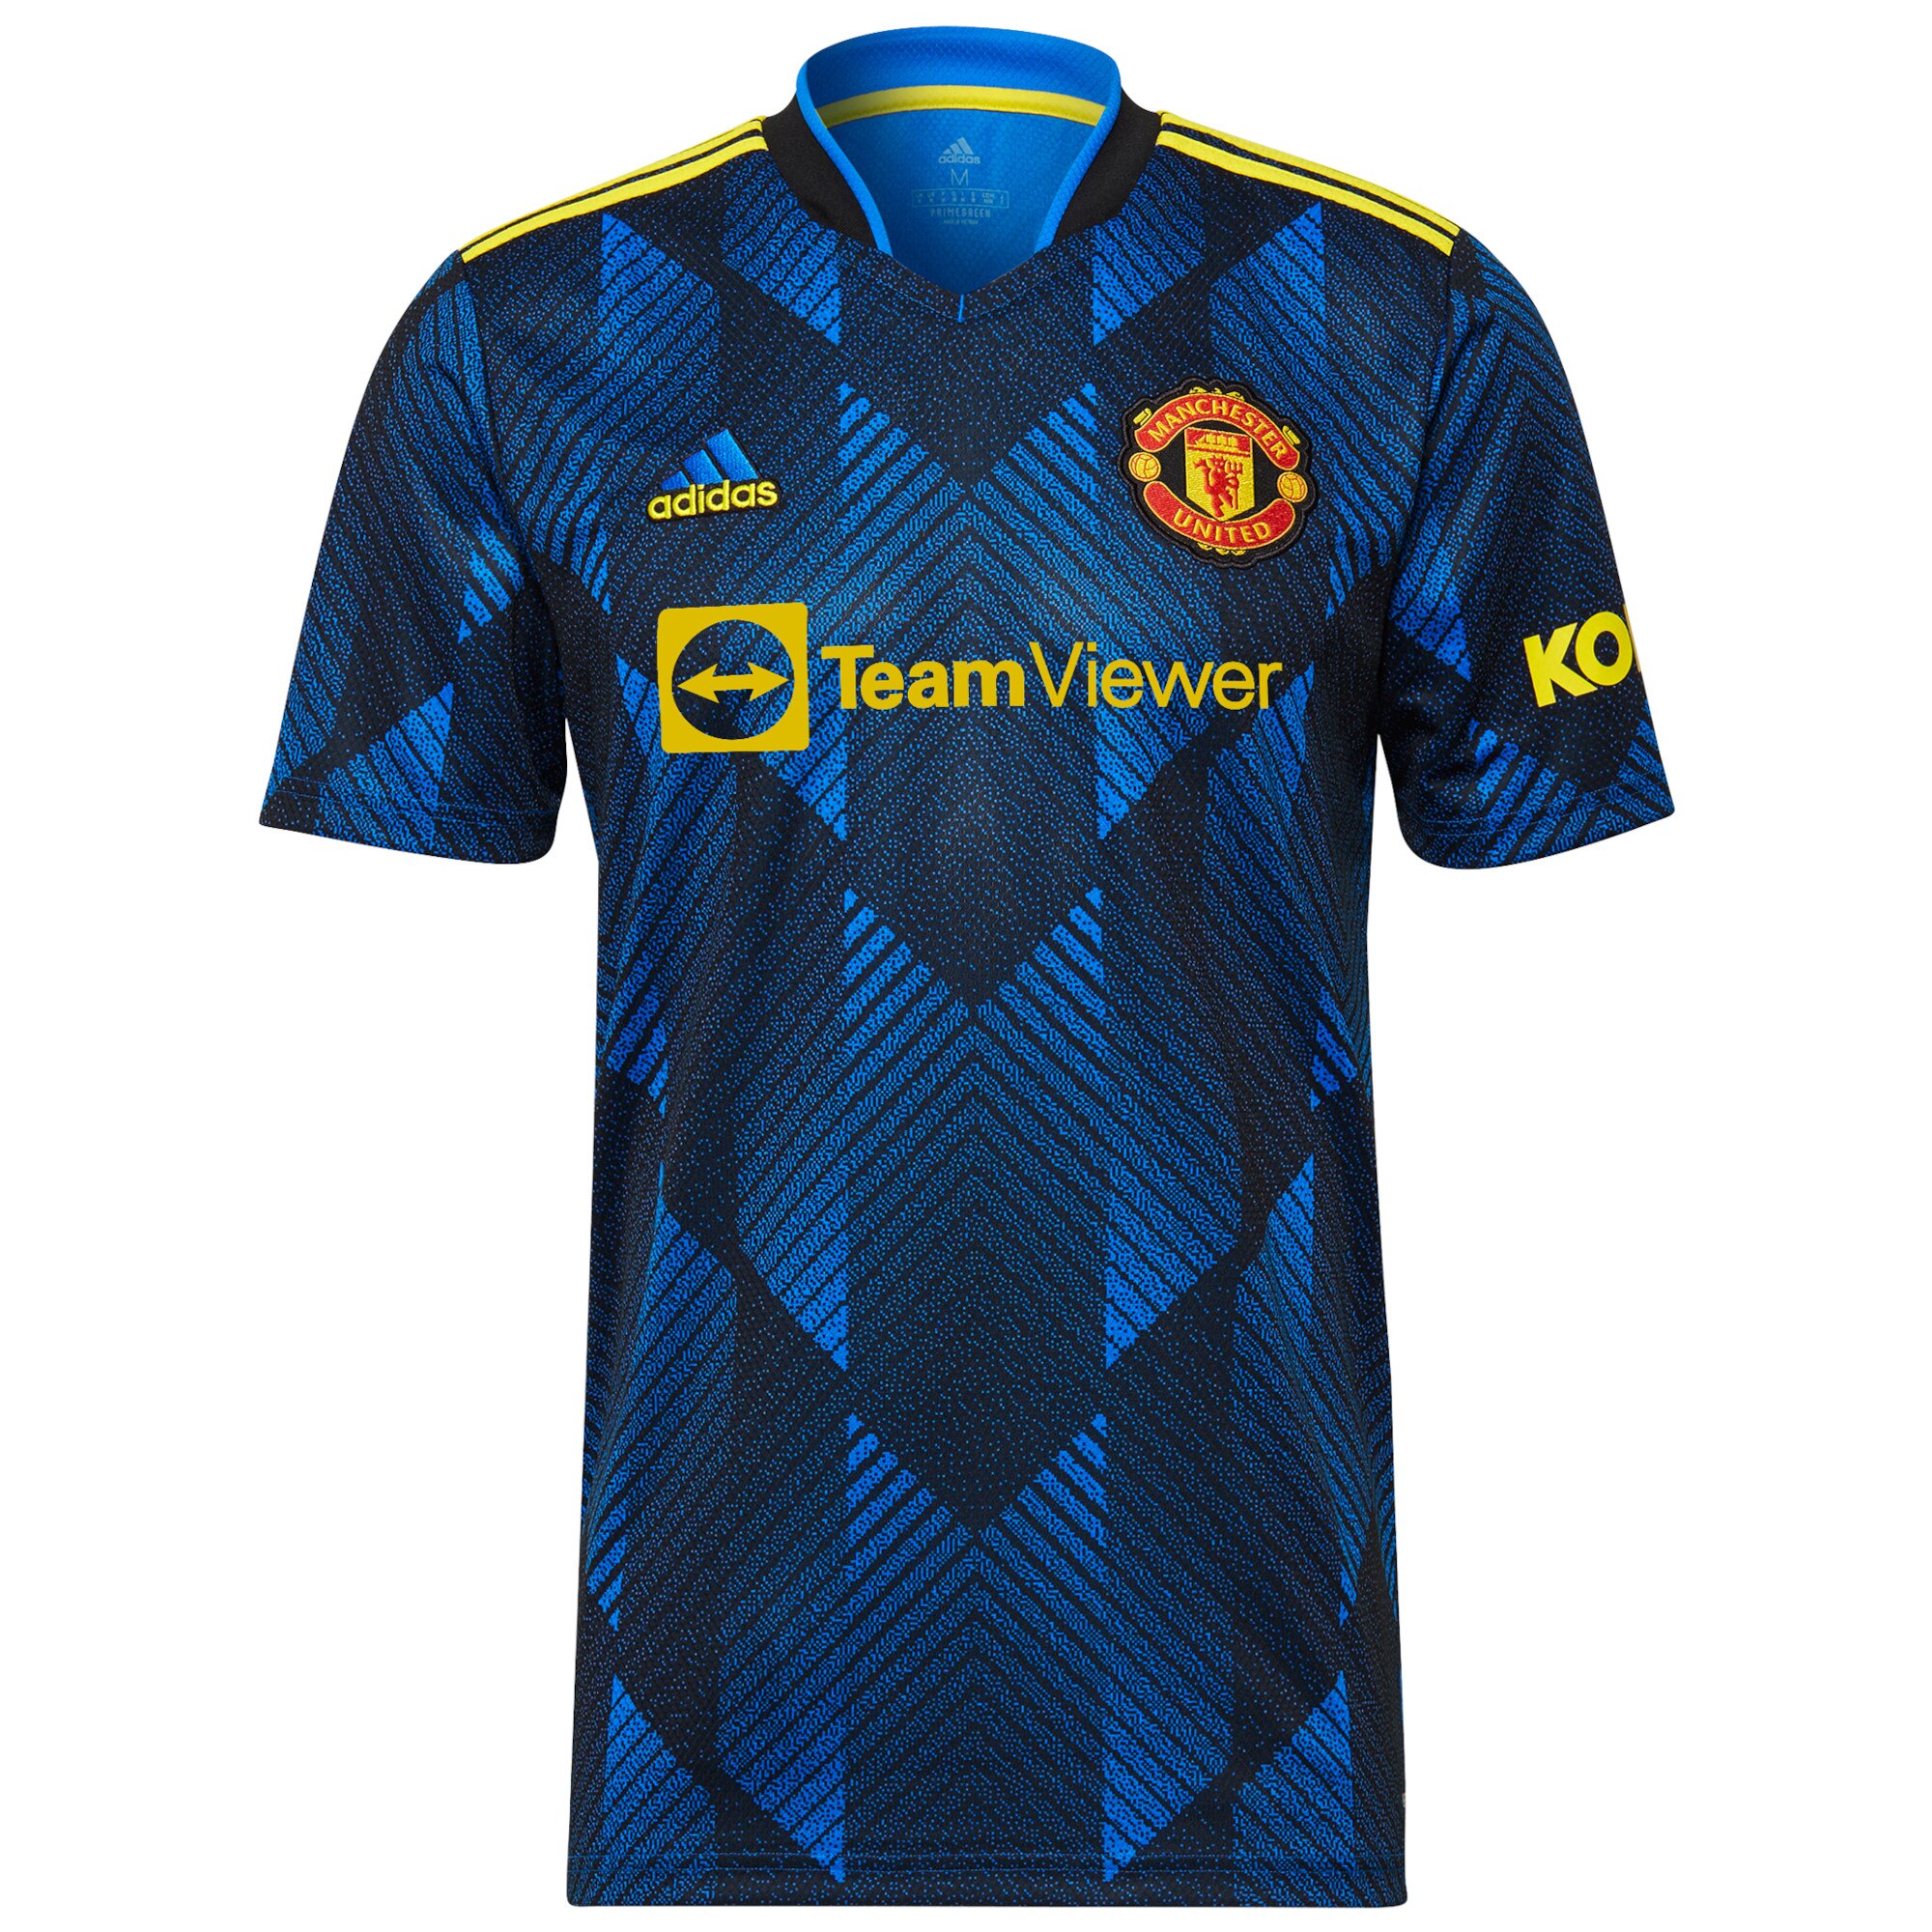 Manchester United Cup Third Shirt 2021-22 with Thomas 9 printing